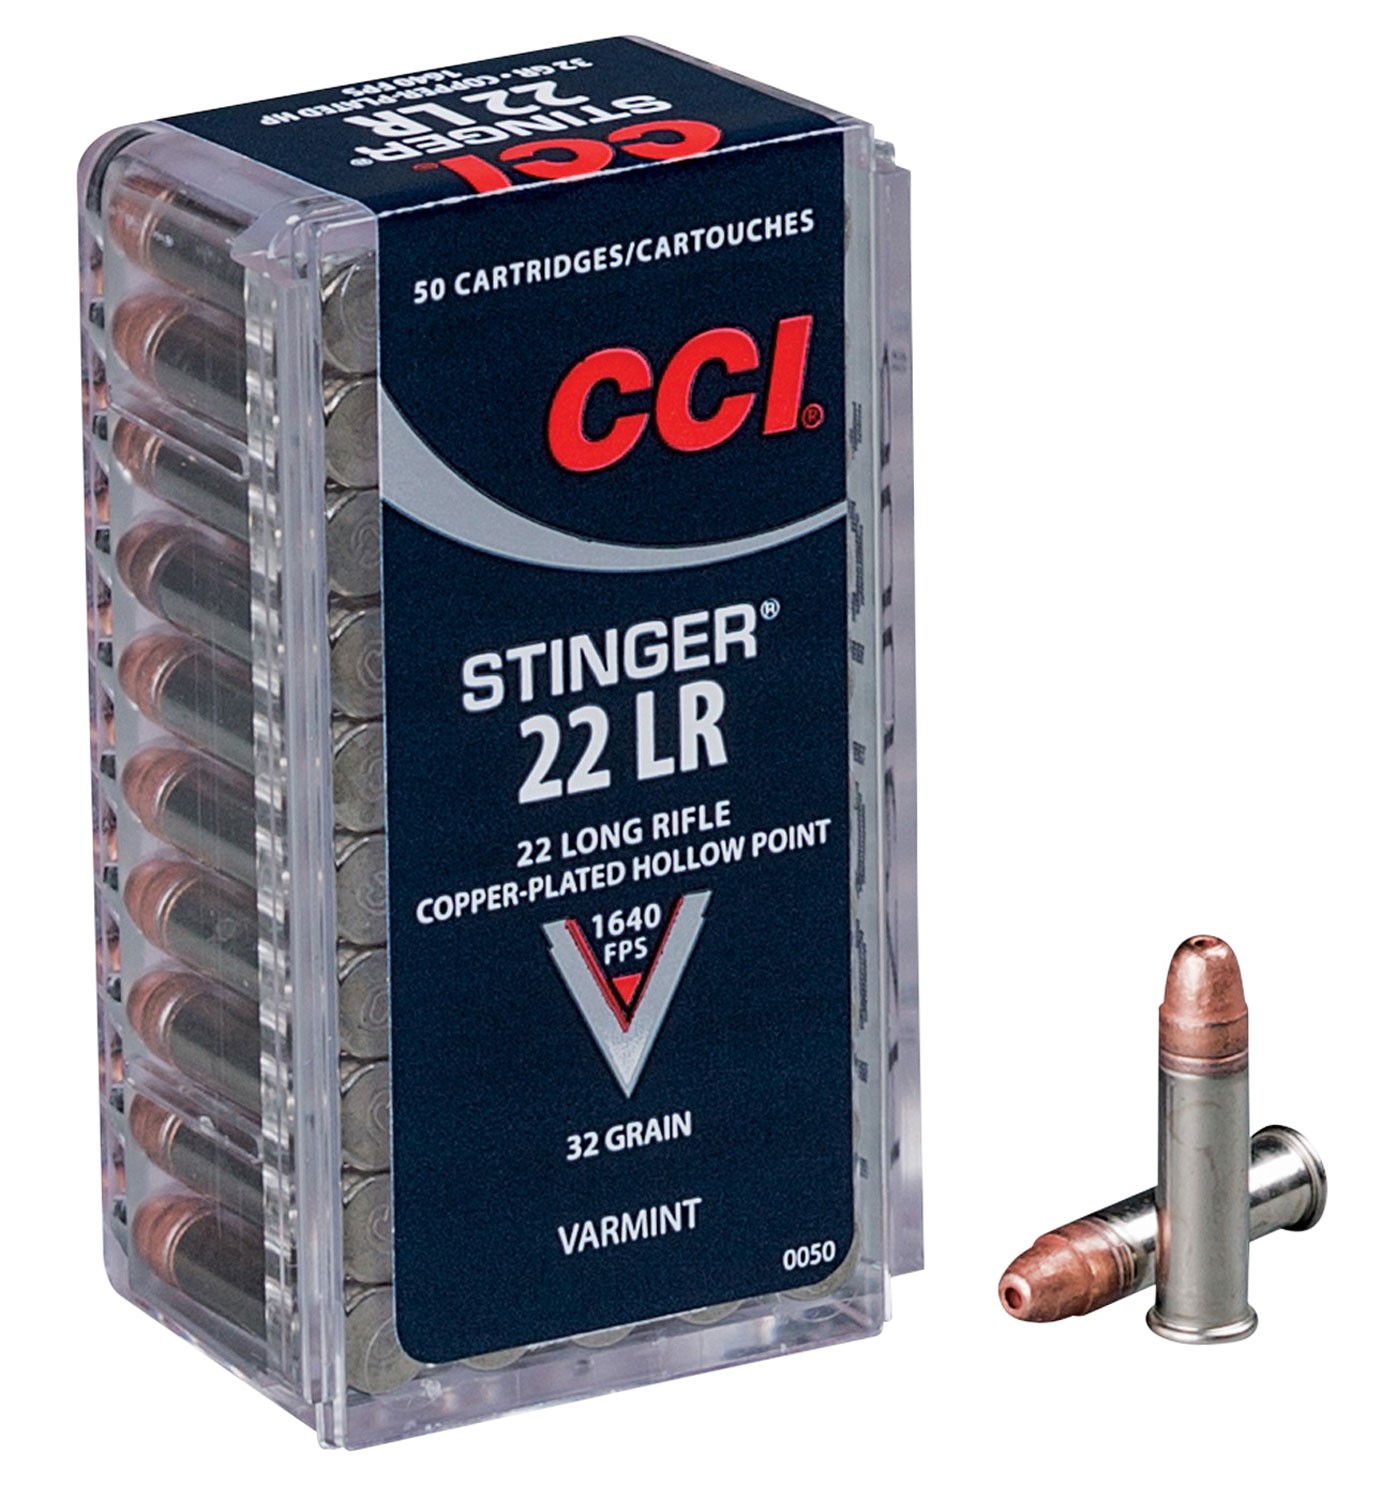 CCI Stinger .22 Long Rifle 32 Grain Copper Plated Hollow Point